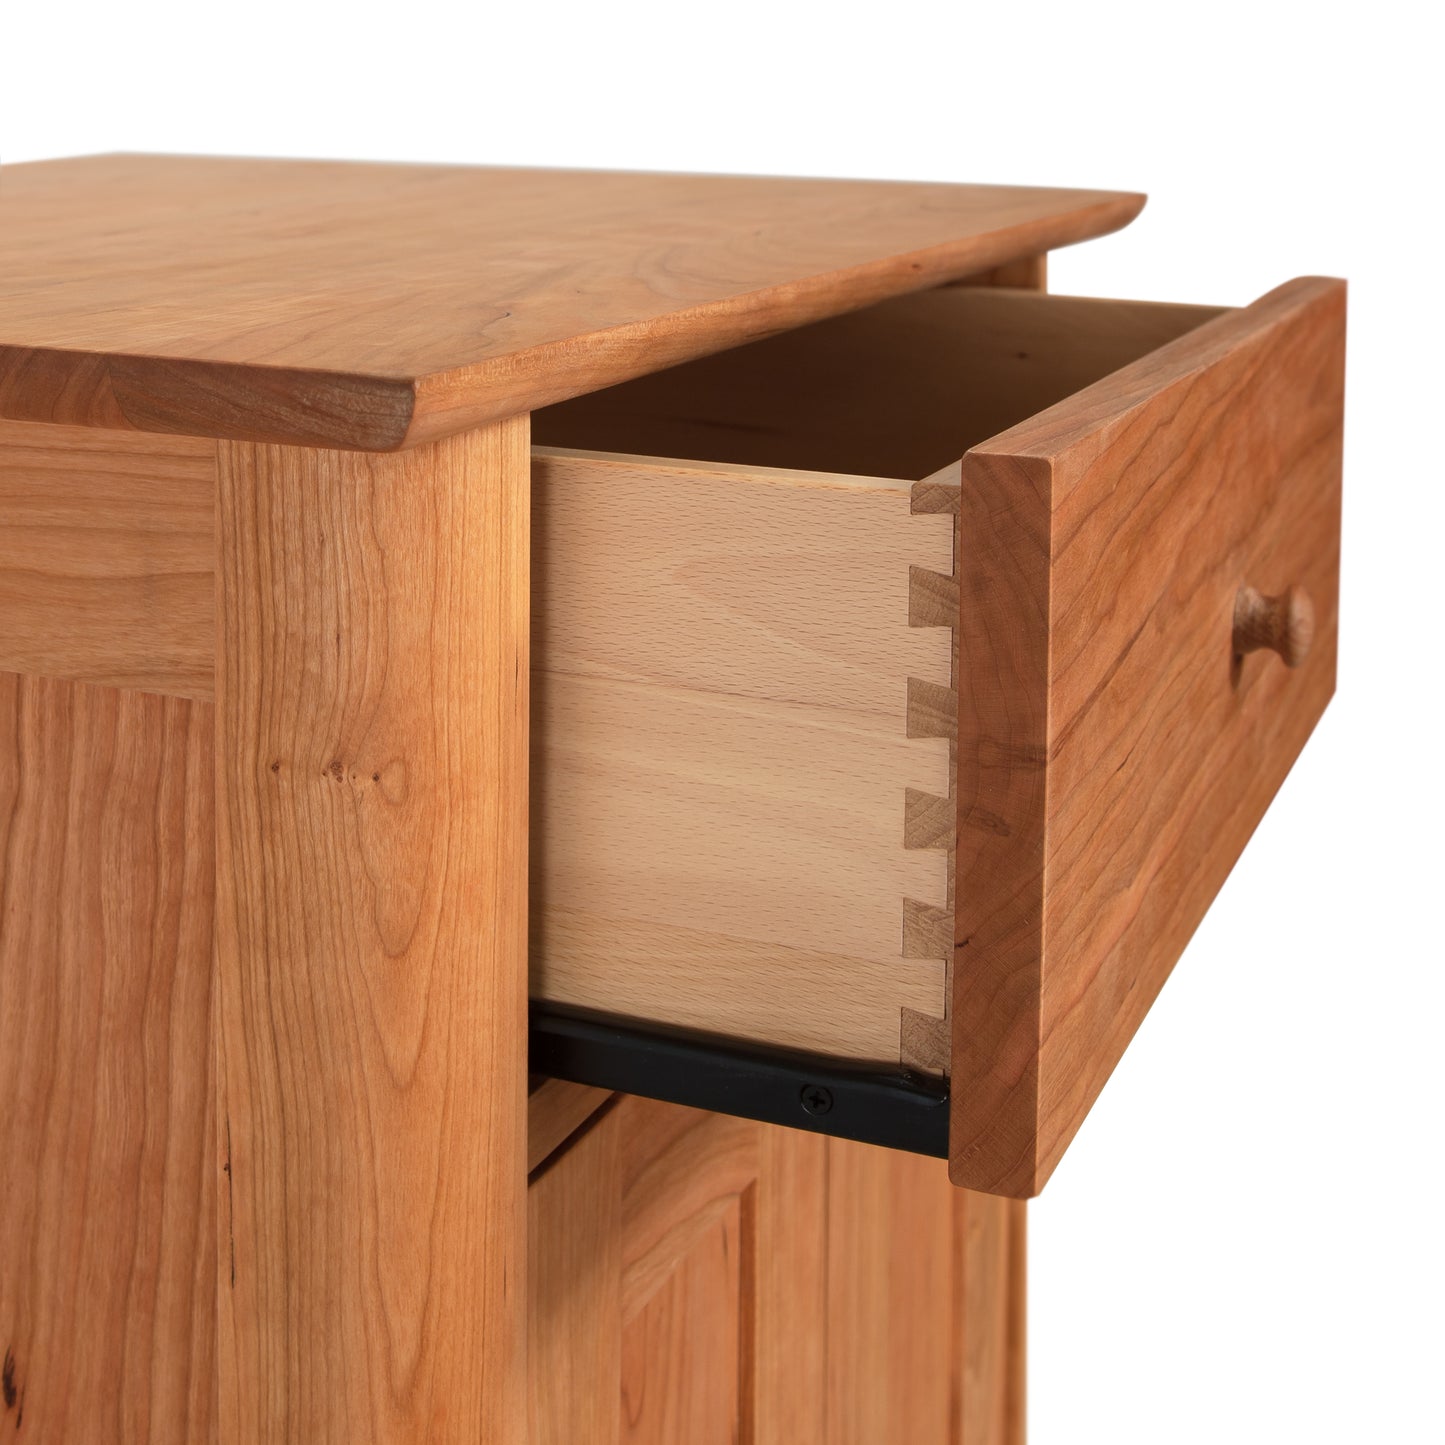 An image of a Vermont Furniture Designs Heartwood Shaker Short Storage Chest with a drawer.